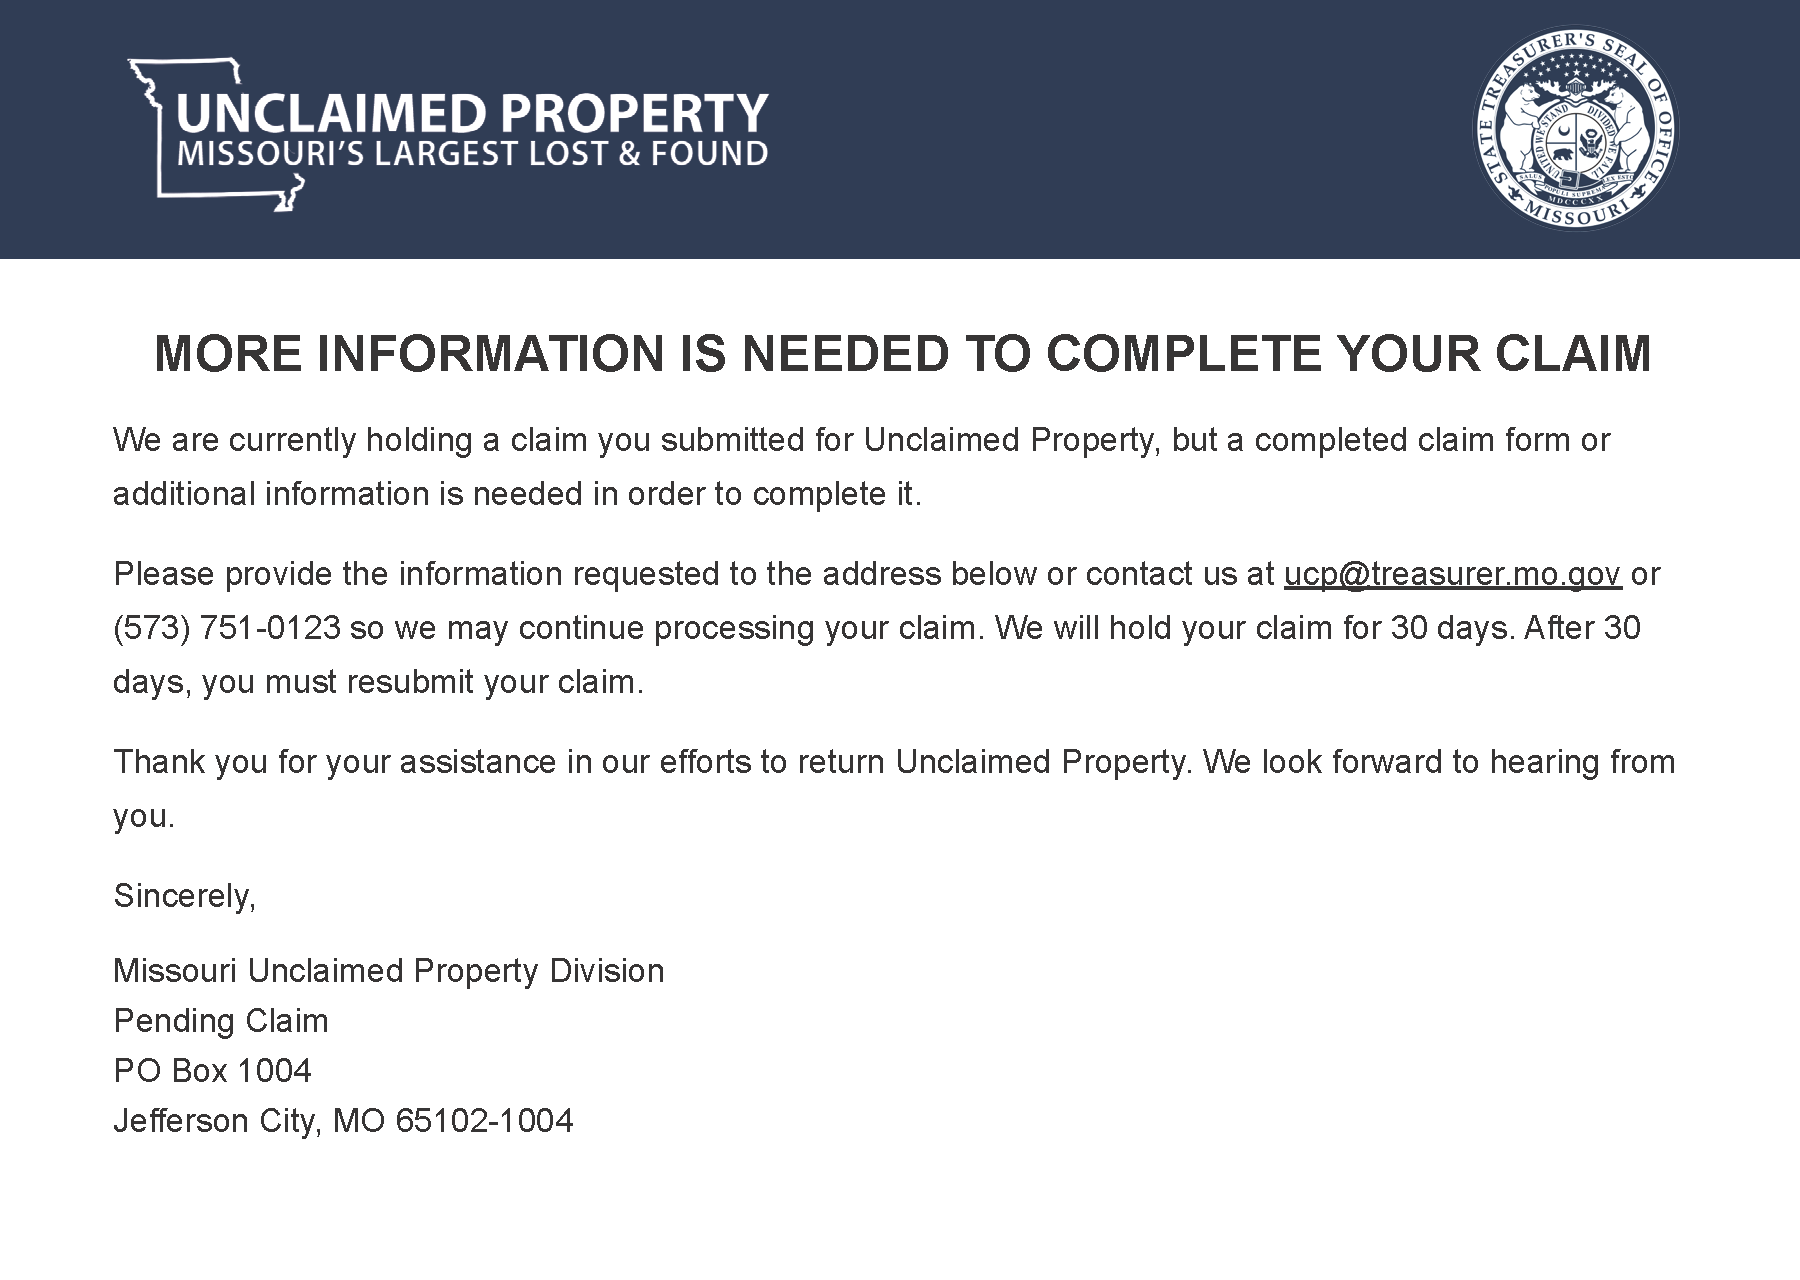 More Information Is Needed to Complete Your Claim postcard image